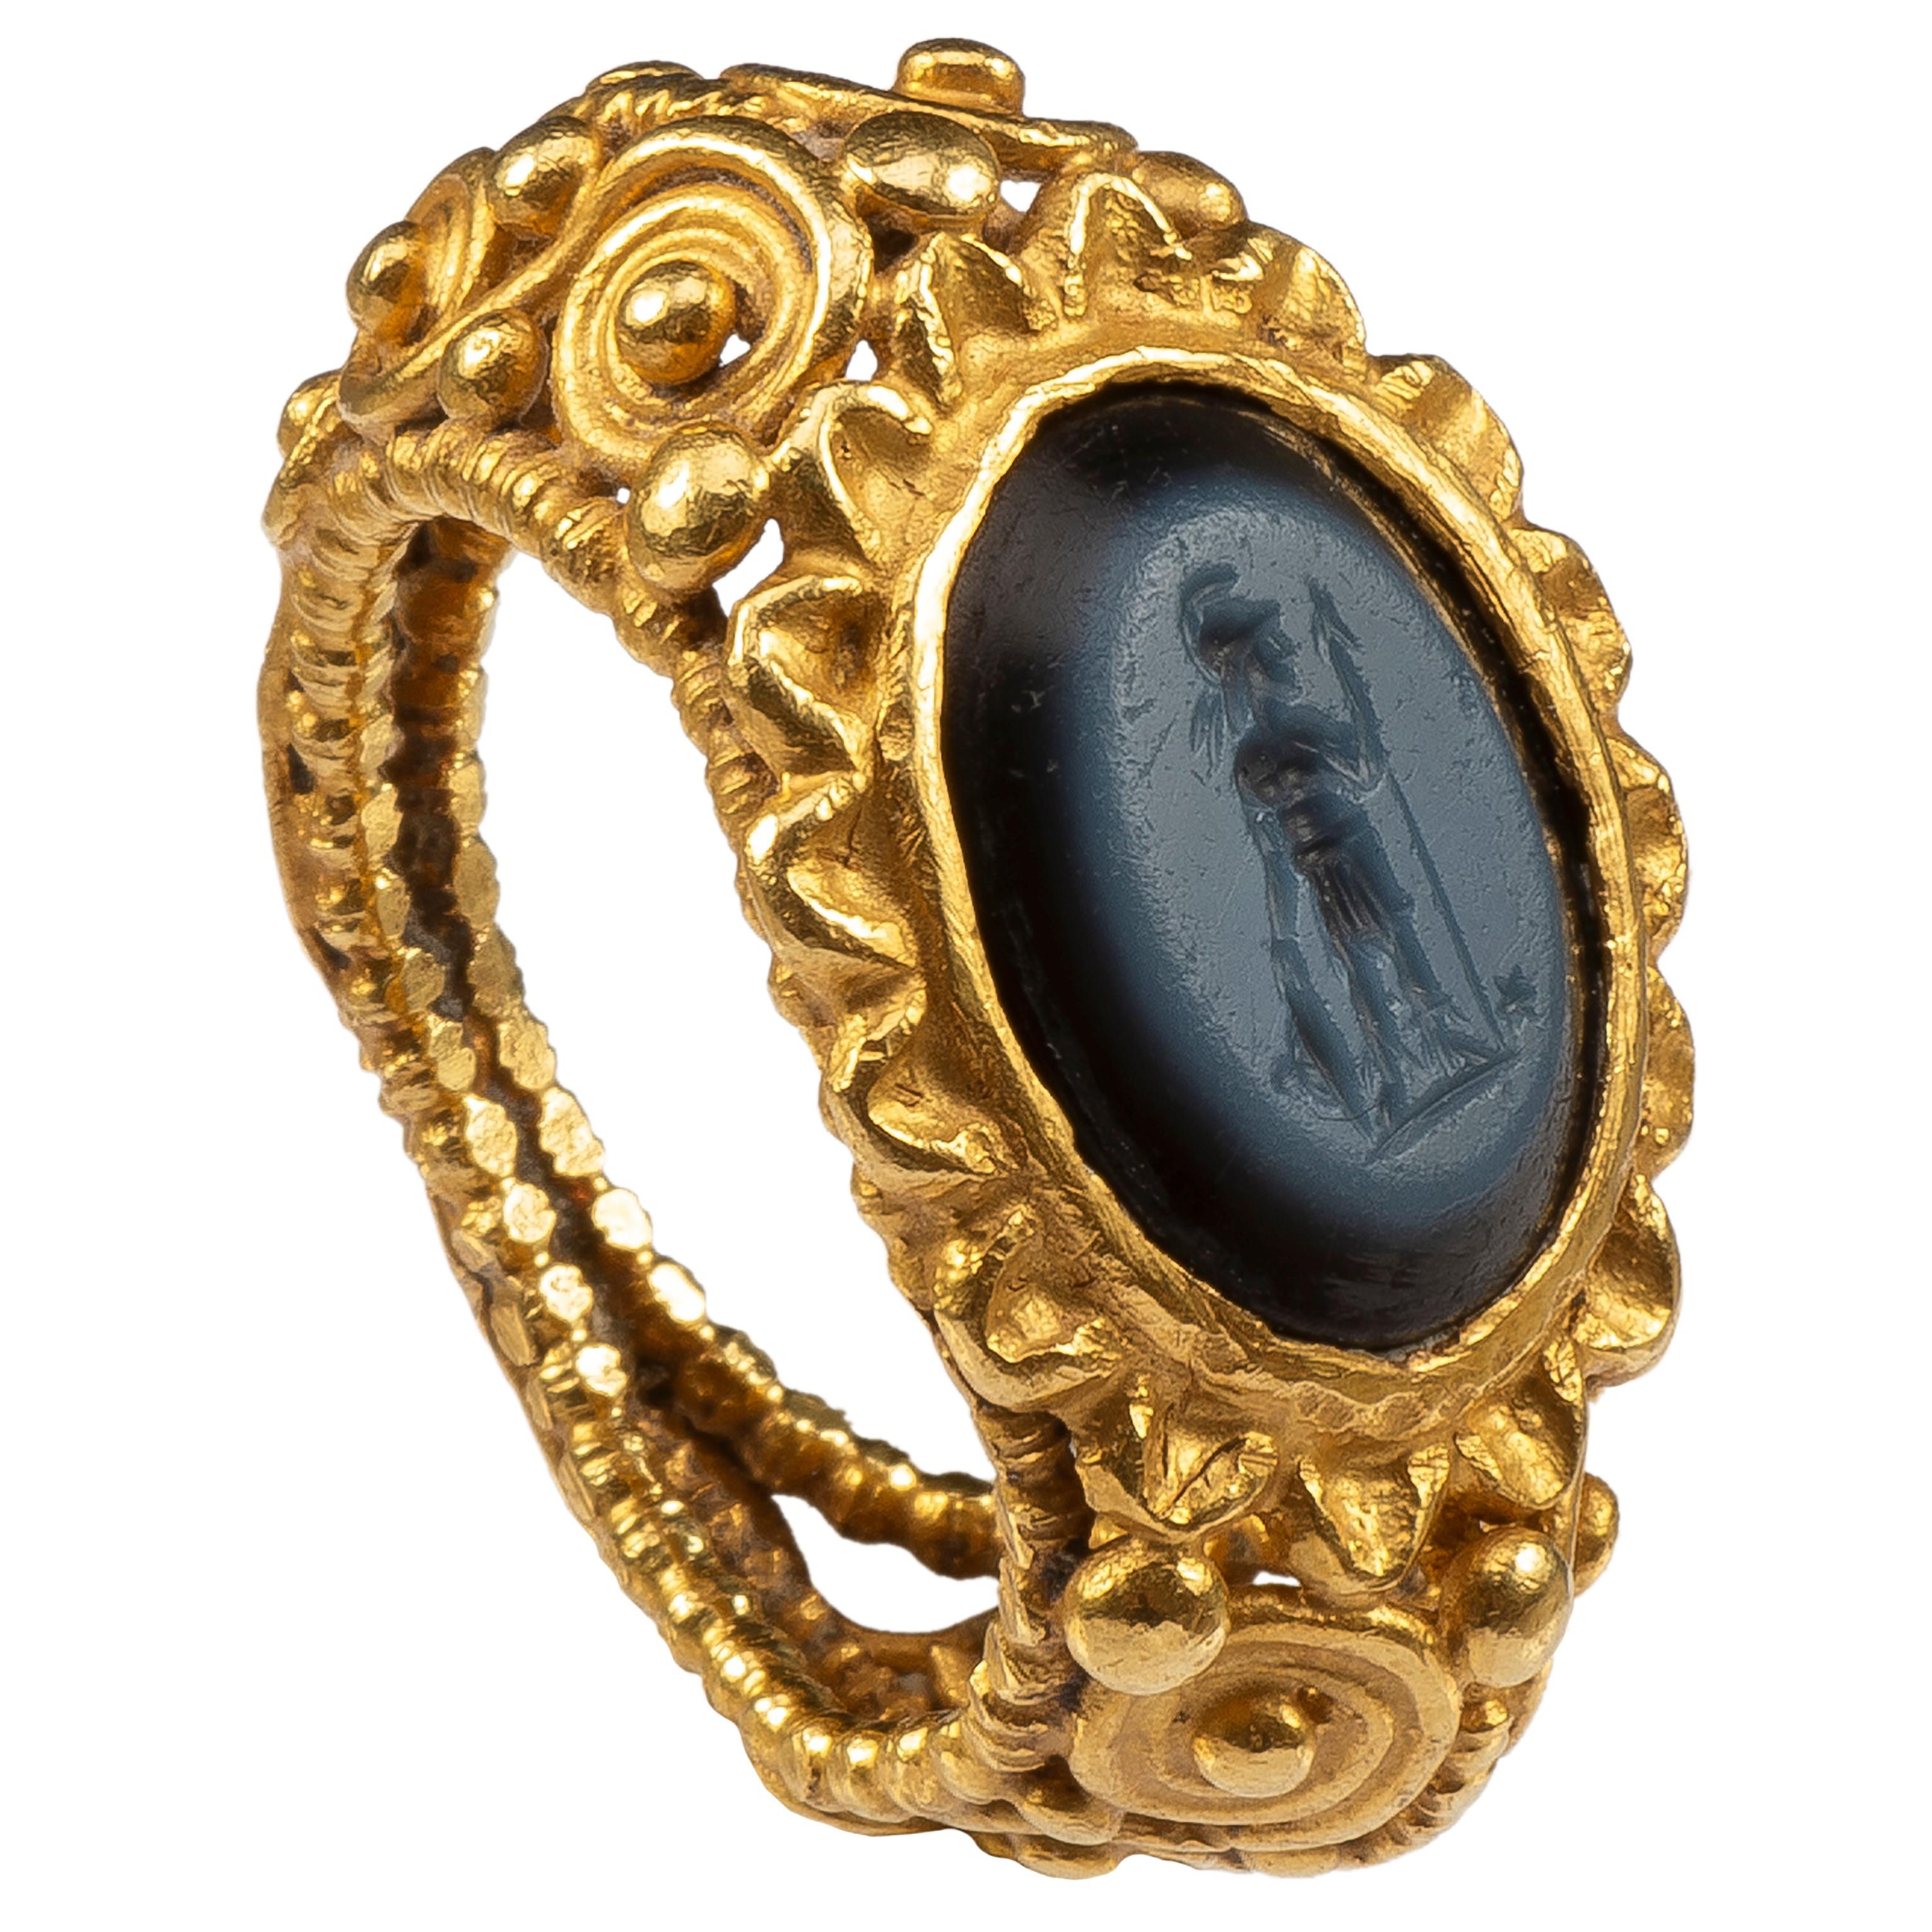 Roman Ring with Intaglio of Mars 
Roman, 4th century AD, intaglio 3rd century AD
Gold, nicolo
Weight: 15.3 gr.; Circumference: 49.32 mm.; US size 5; UK size J ½

This deceptively heavy gold ring consists of a hoop made of filigree wires. A central